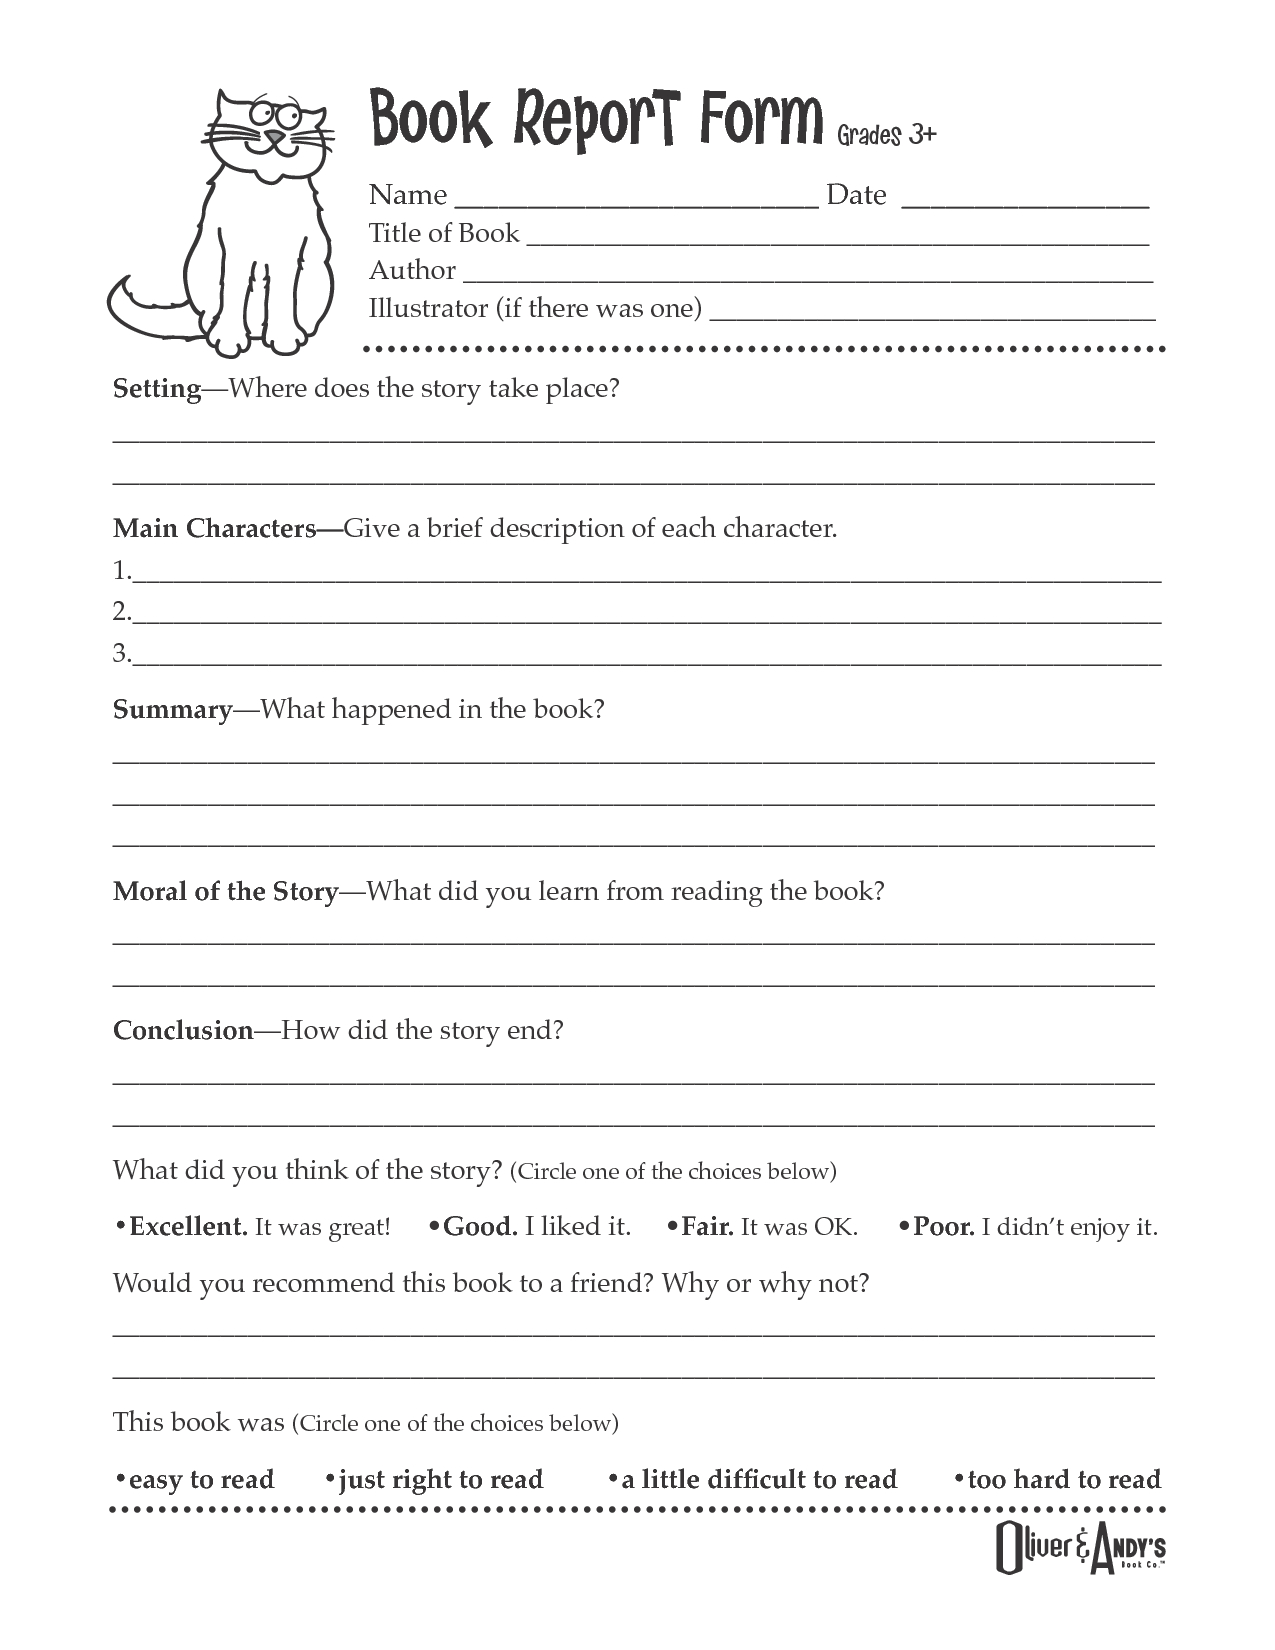 Second Grade Book Report Template | Book Report Form Grades With Regard To Story Report Template